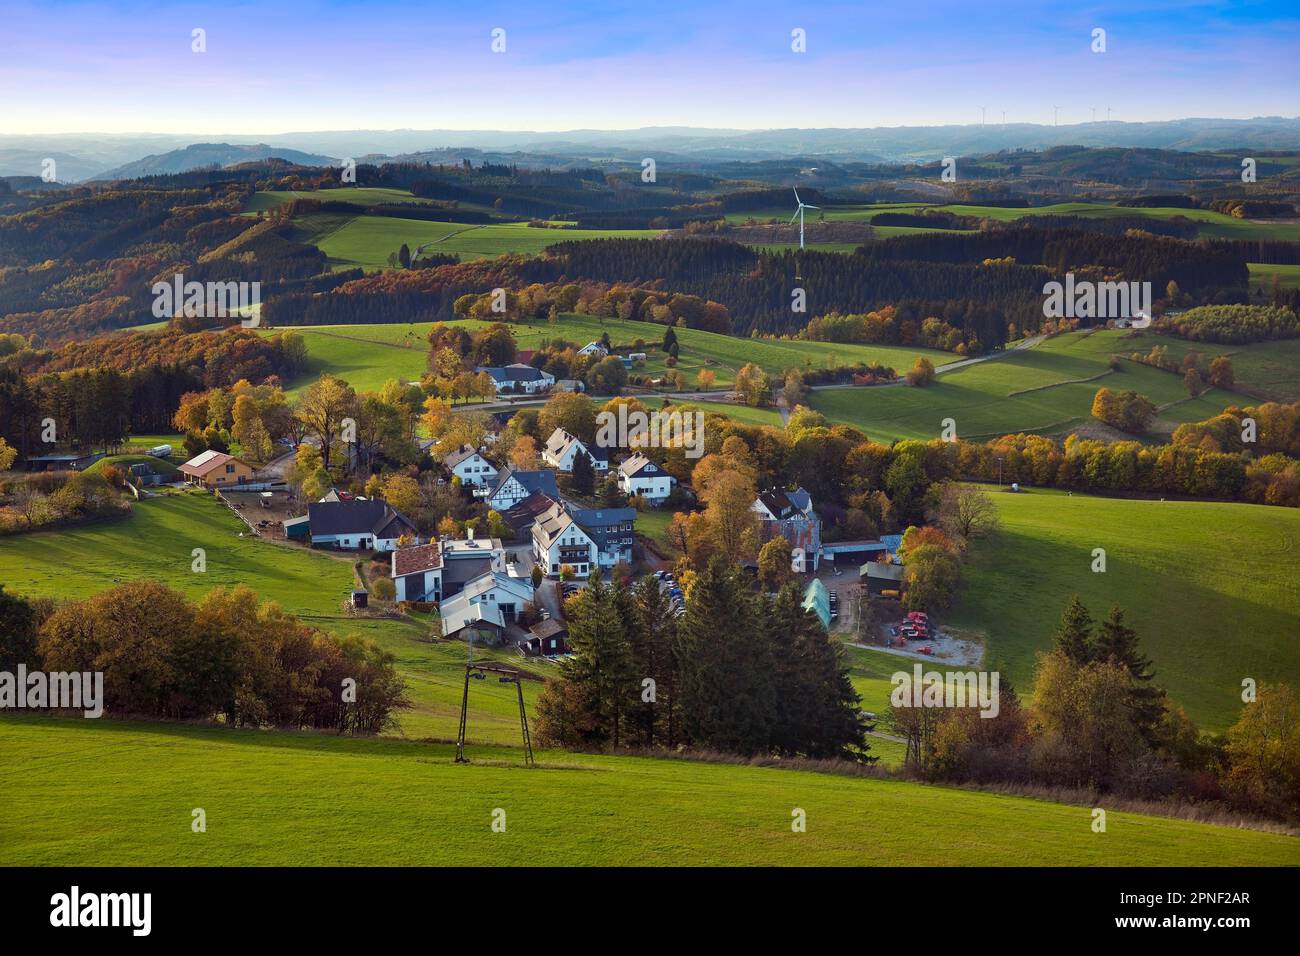 view of the landscape with the small village of Wildewiese, Germany, North Rhine-Westphalia, Sauerland, Sundern Stock Photo